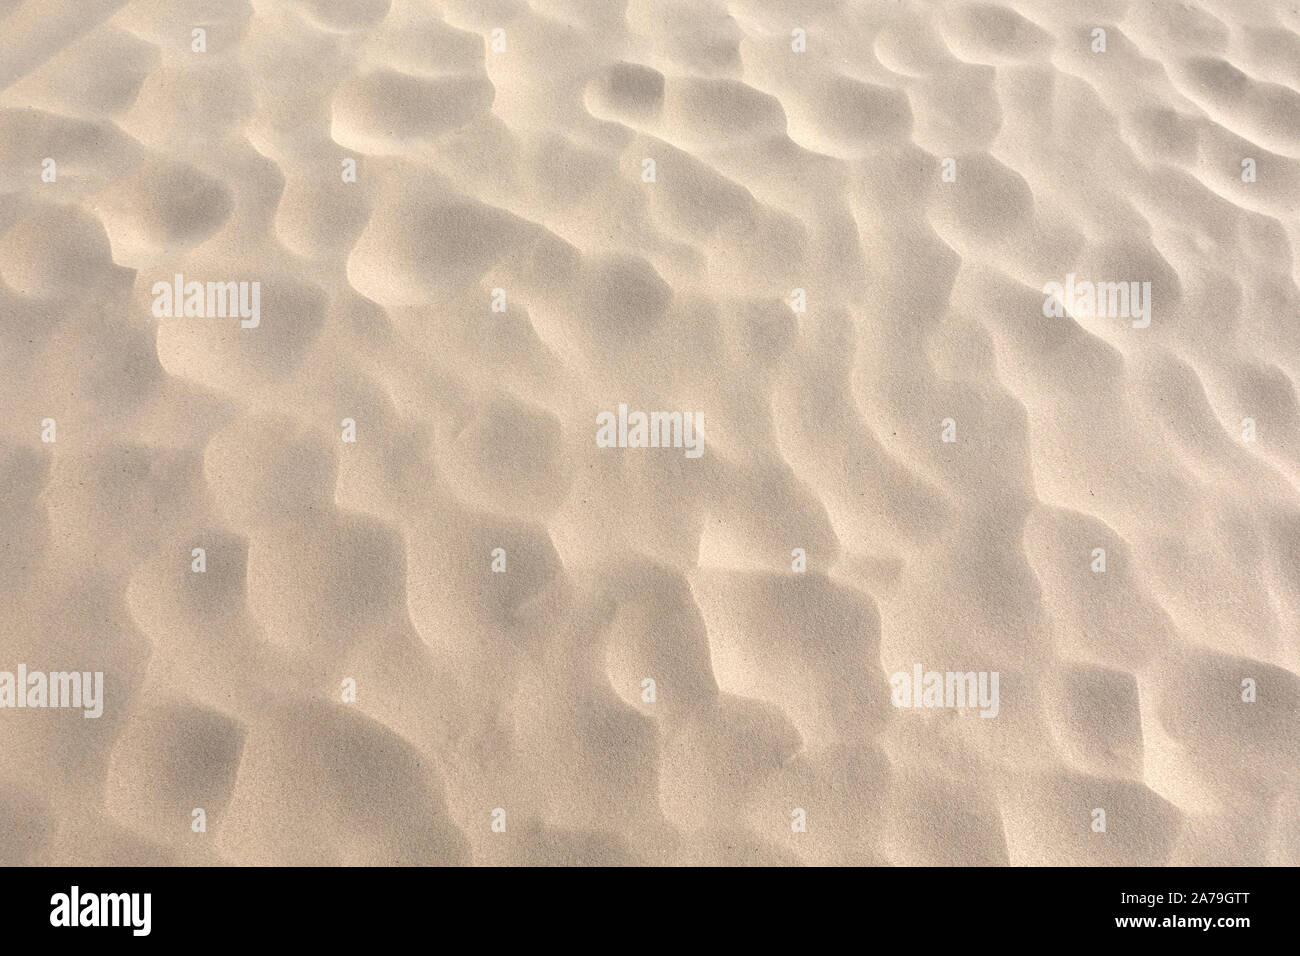 Hot Fine Dry Desert Sand With Dimples As Background Top View Close Up Stock Photo Alamy